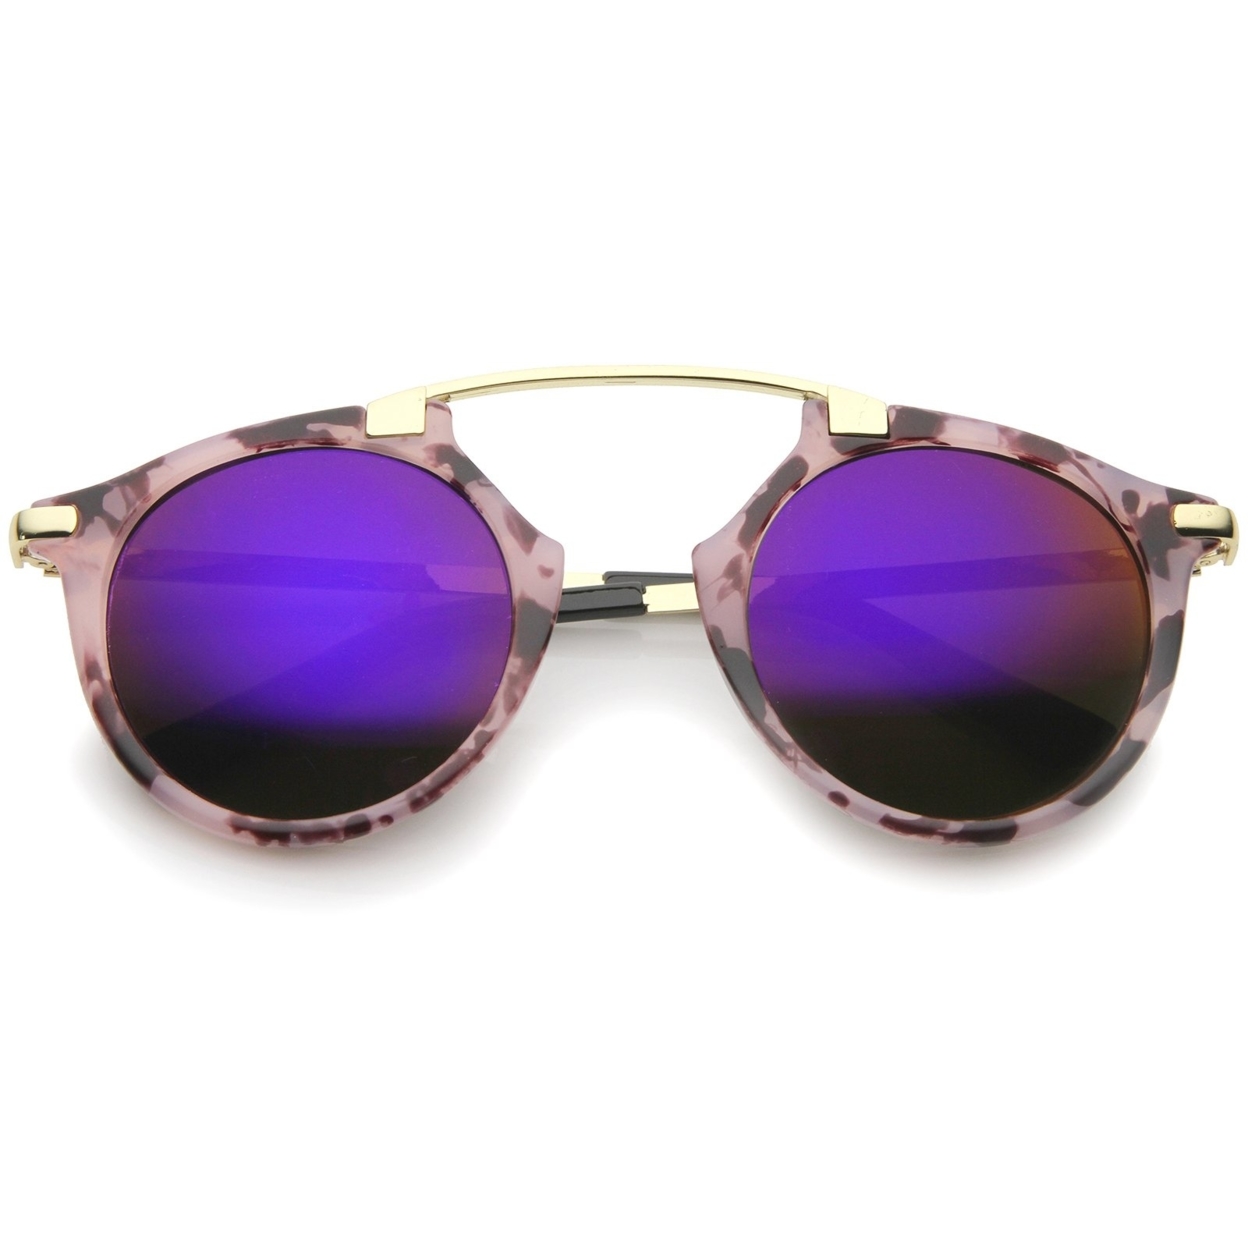 High Fashion Arched Marble Color Frame Color Mirror Pantos Aviator Sunglasses 48mm - Black-Gold / Blue Mirror